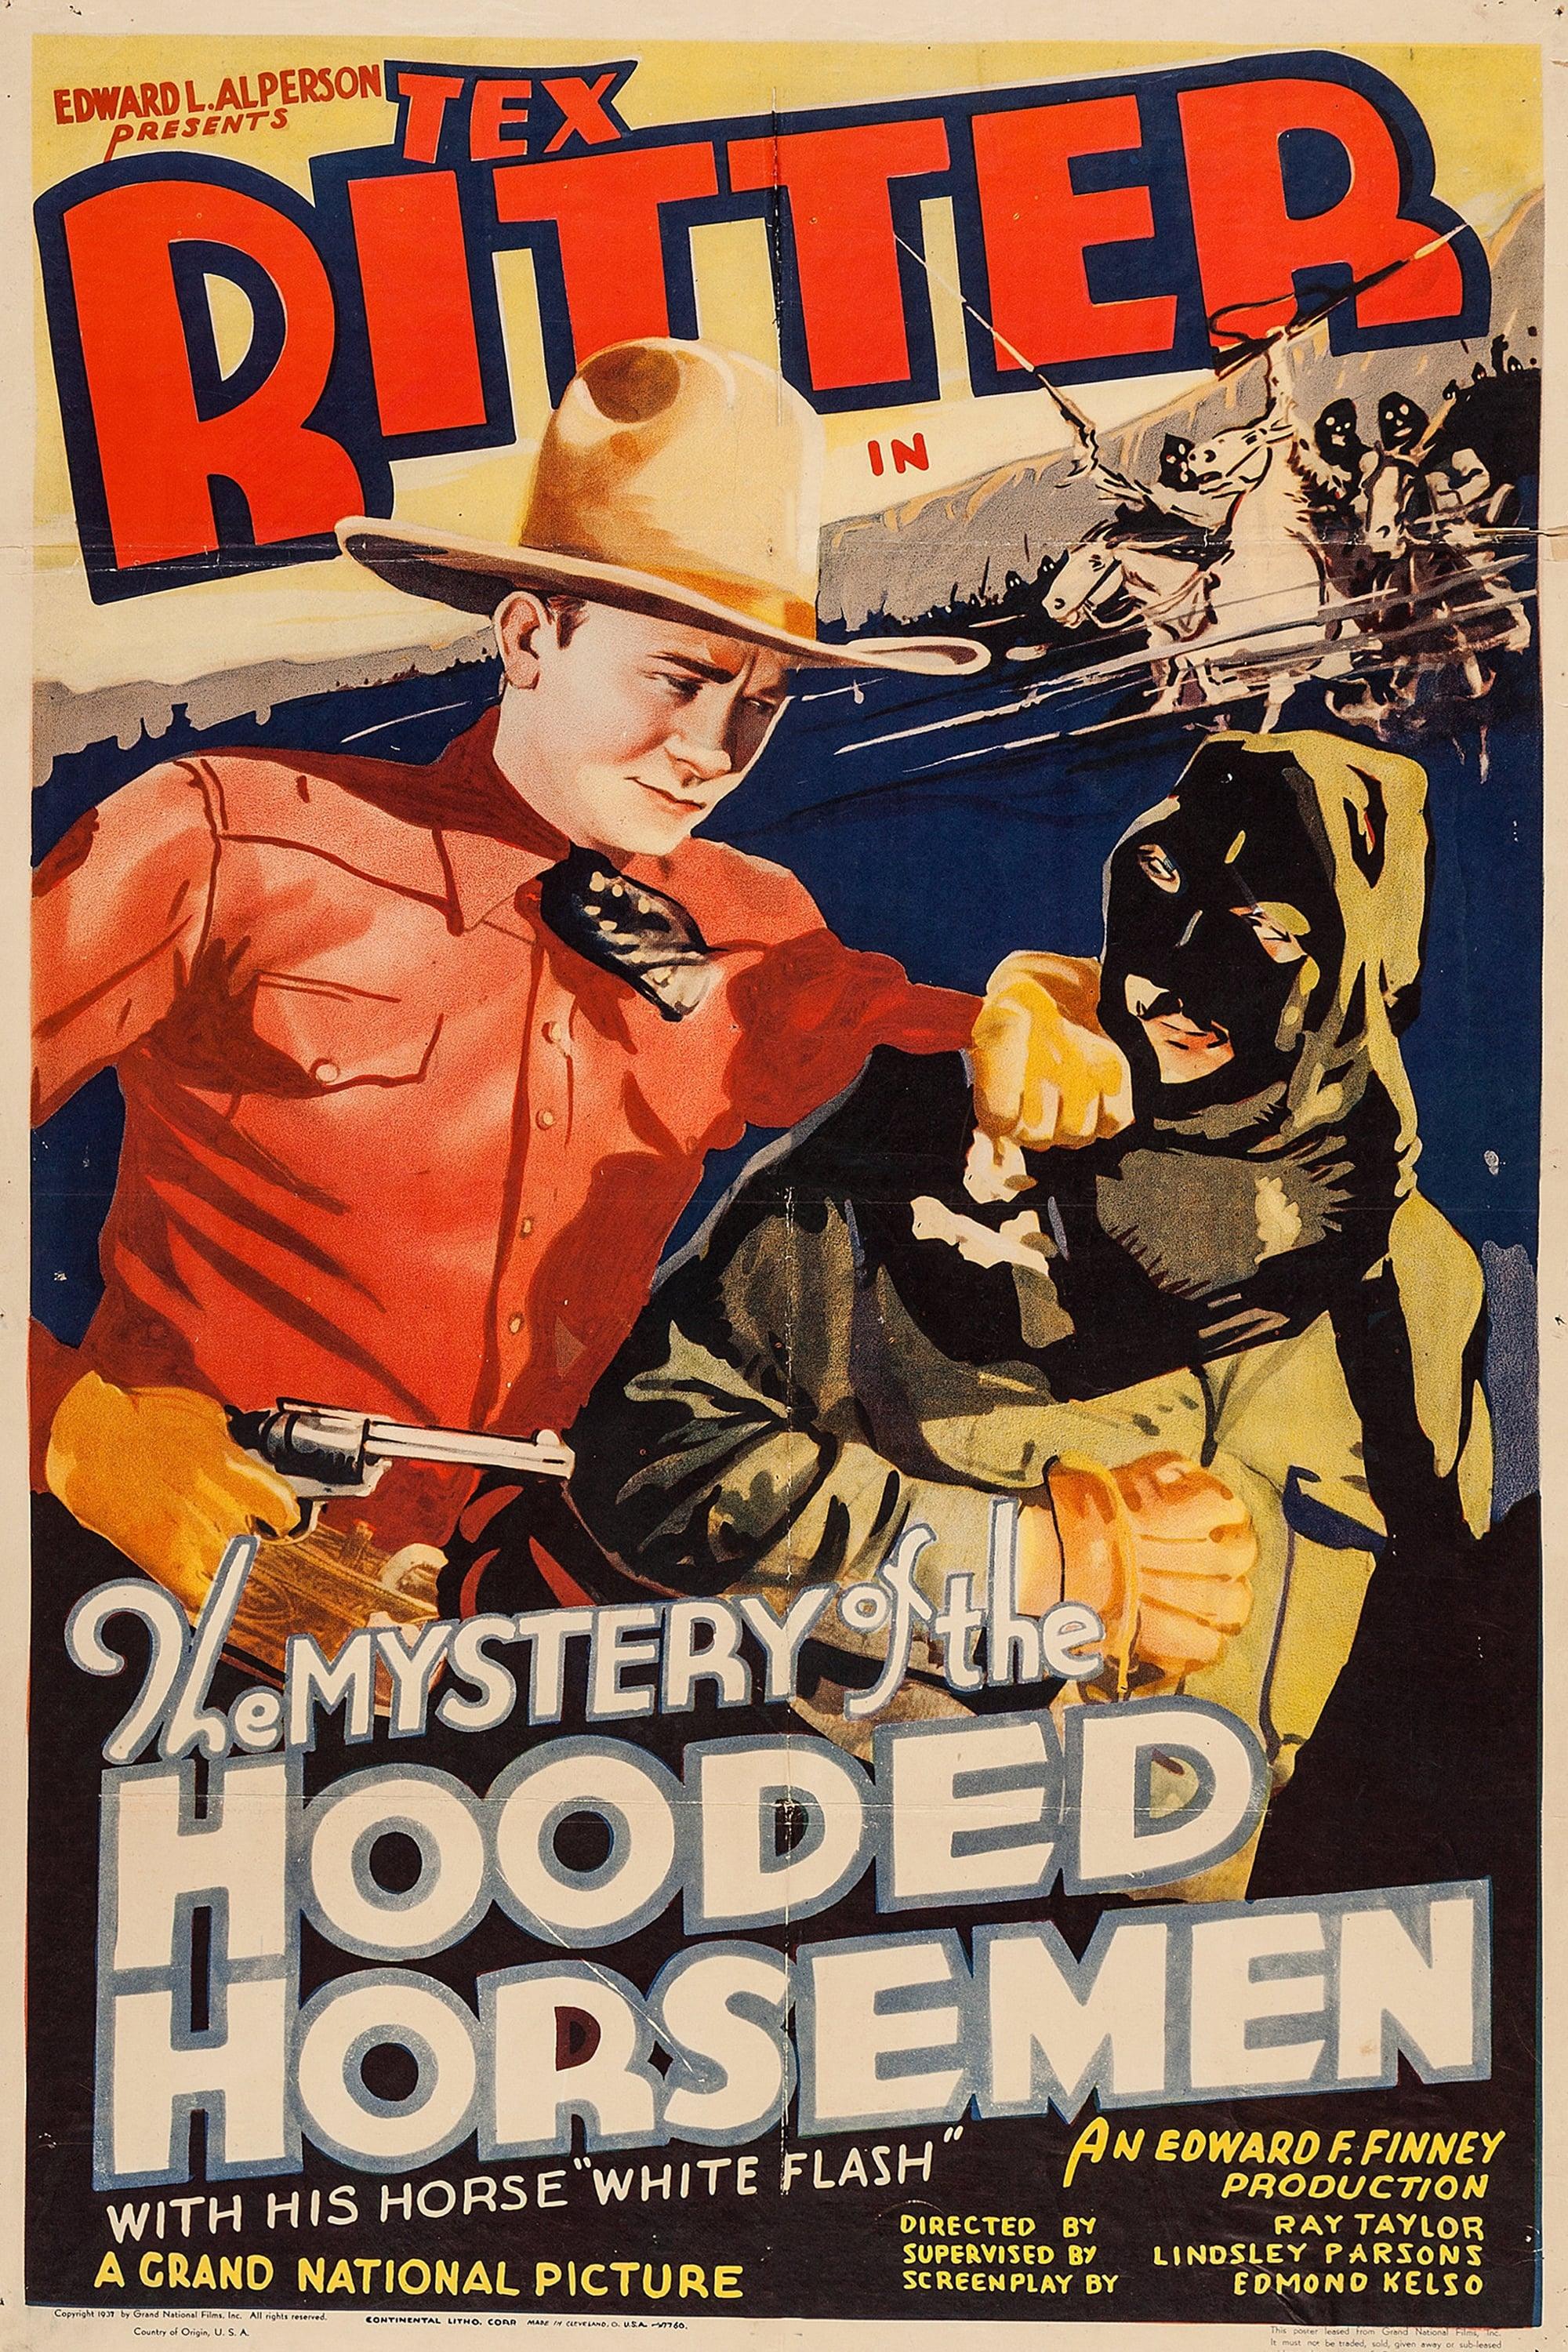 The Mystery of the Hooded Horsemen poster